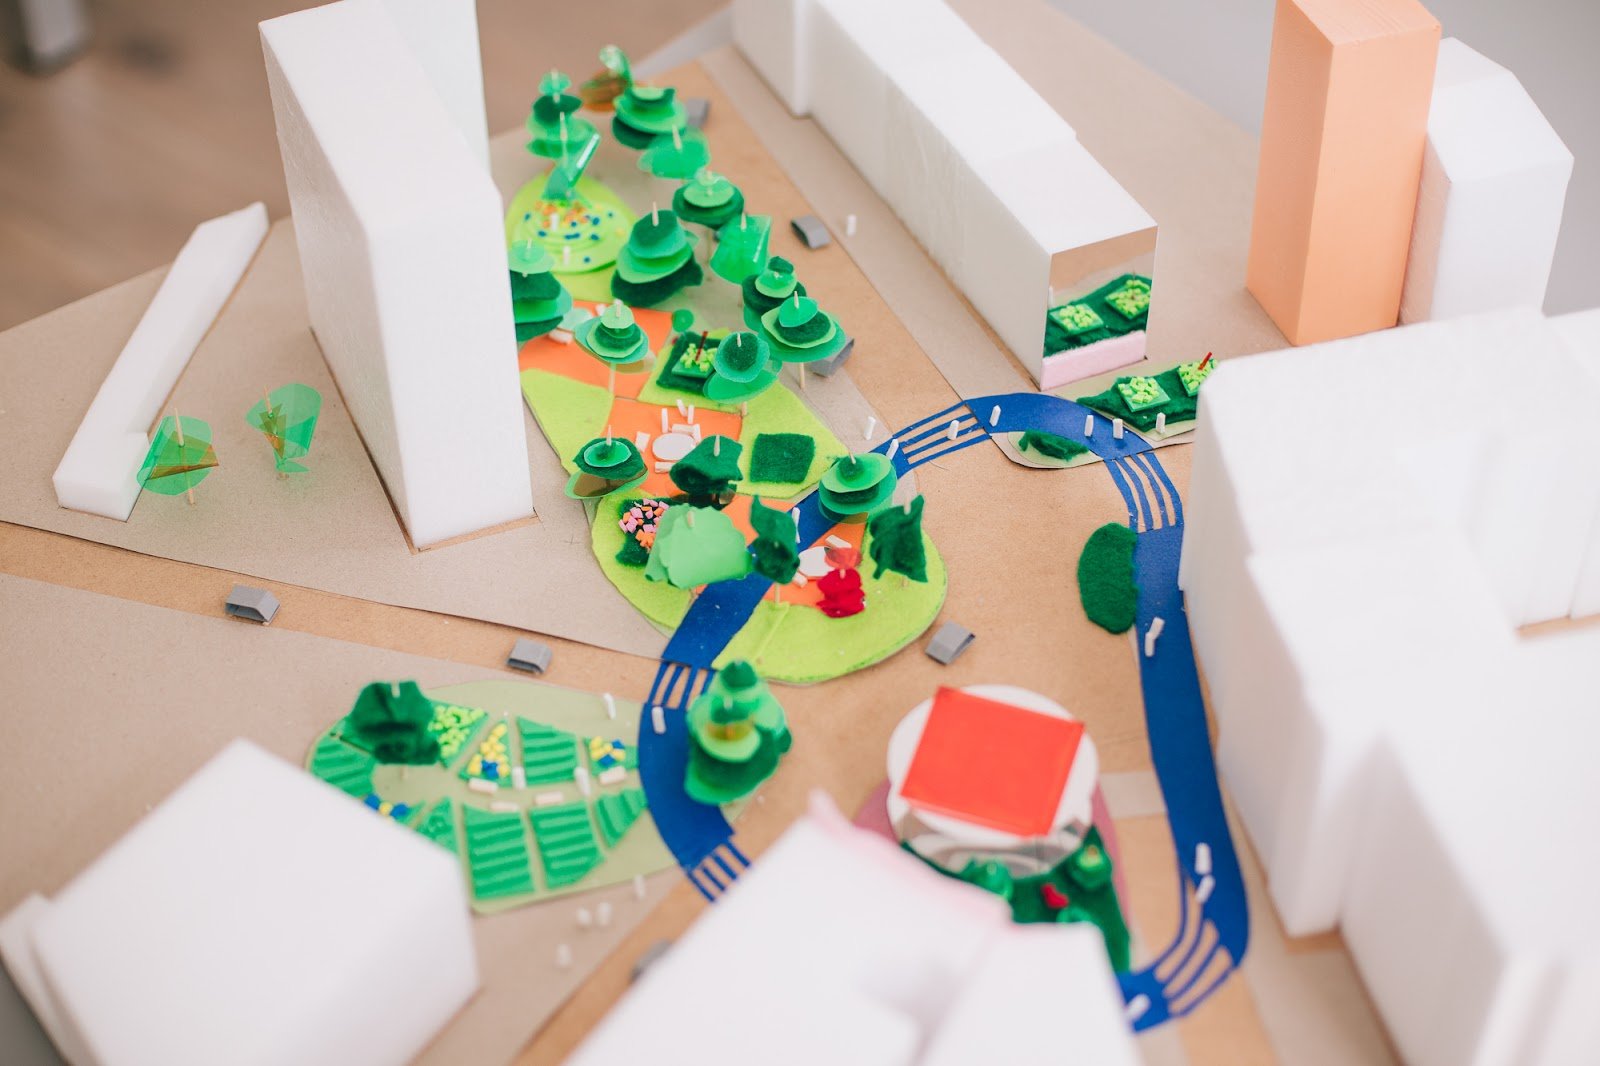  A close-up of a city model made of cardboard. There are large, white skyscrapers and colorful lawns, trees and walking routes.